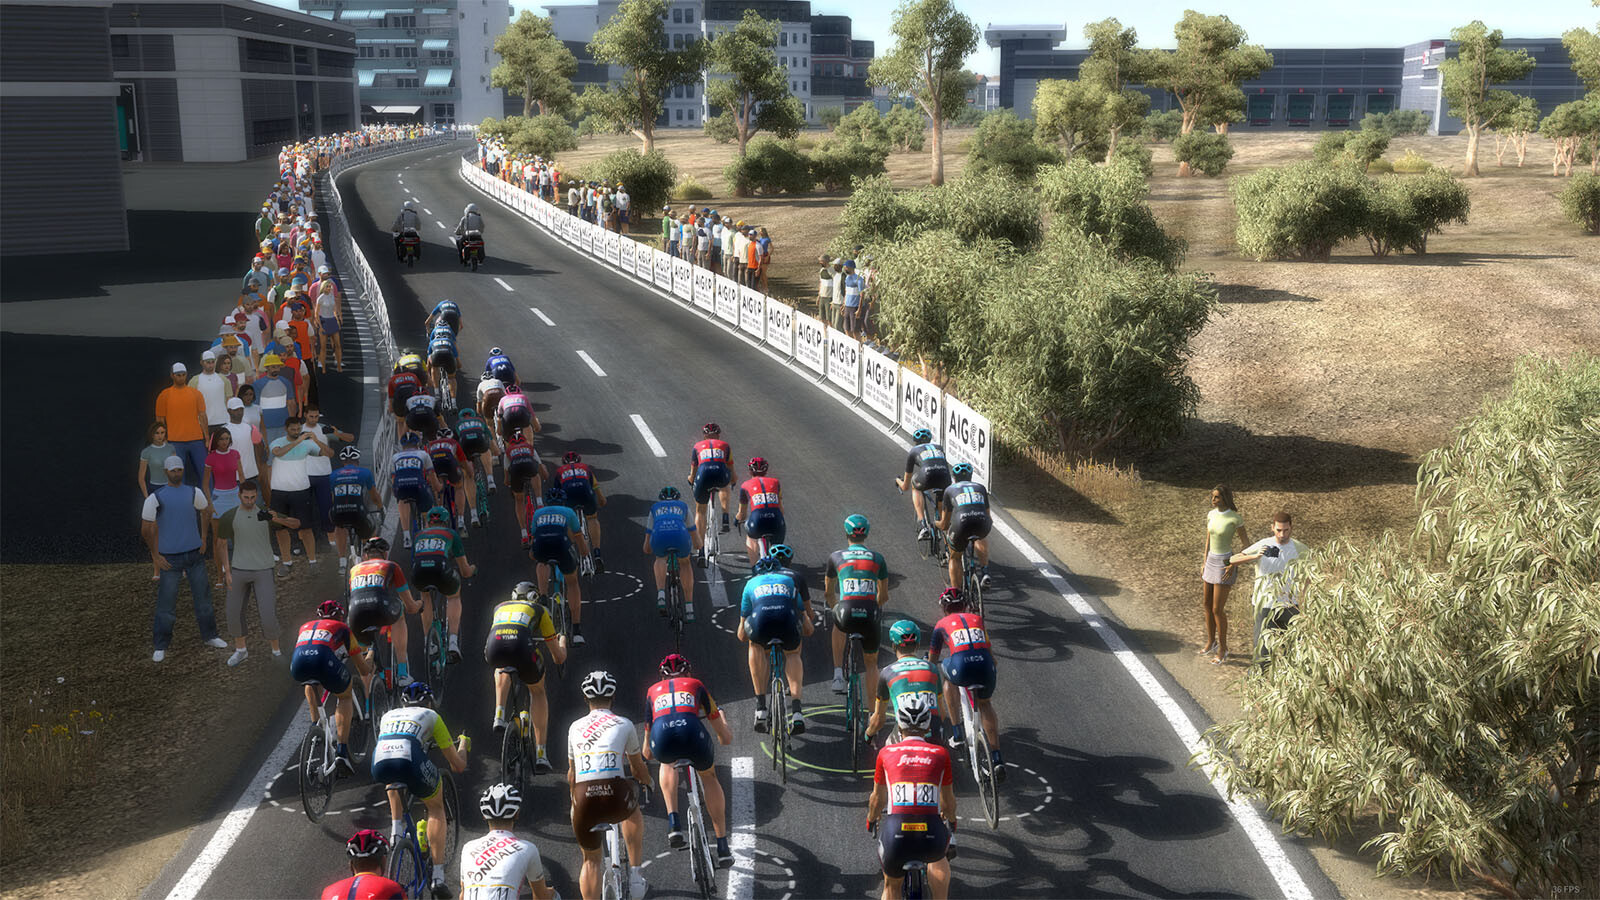 Buy Pro Cycling Manager 2023 - Free shipping